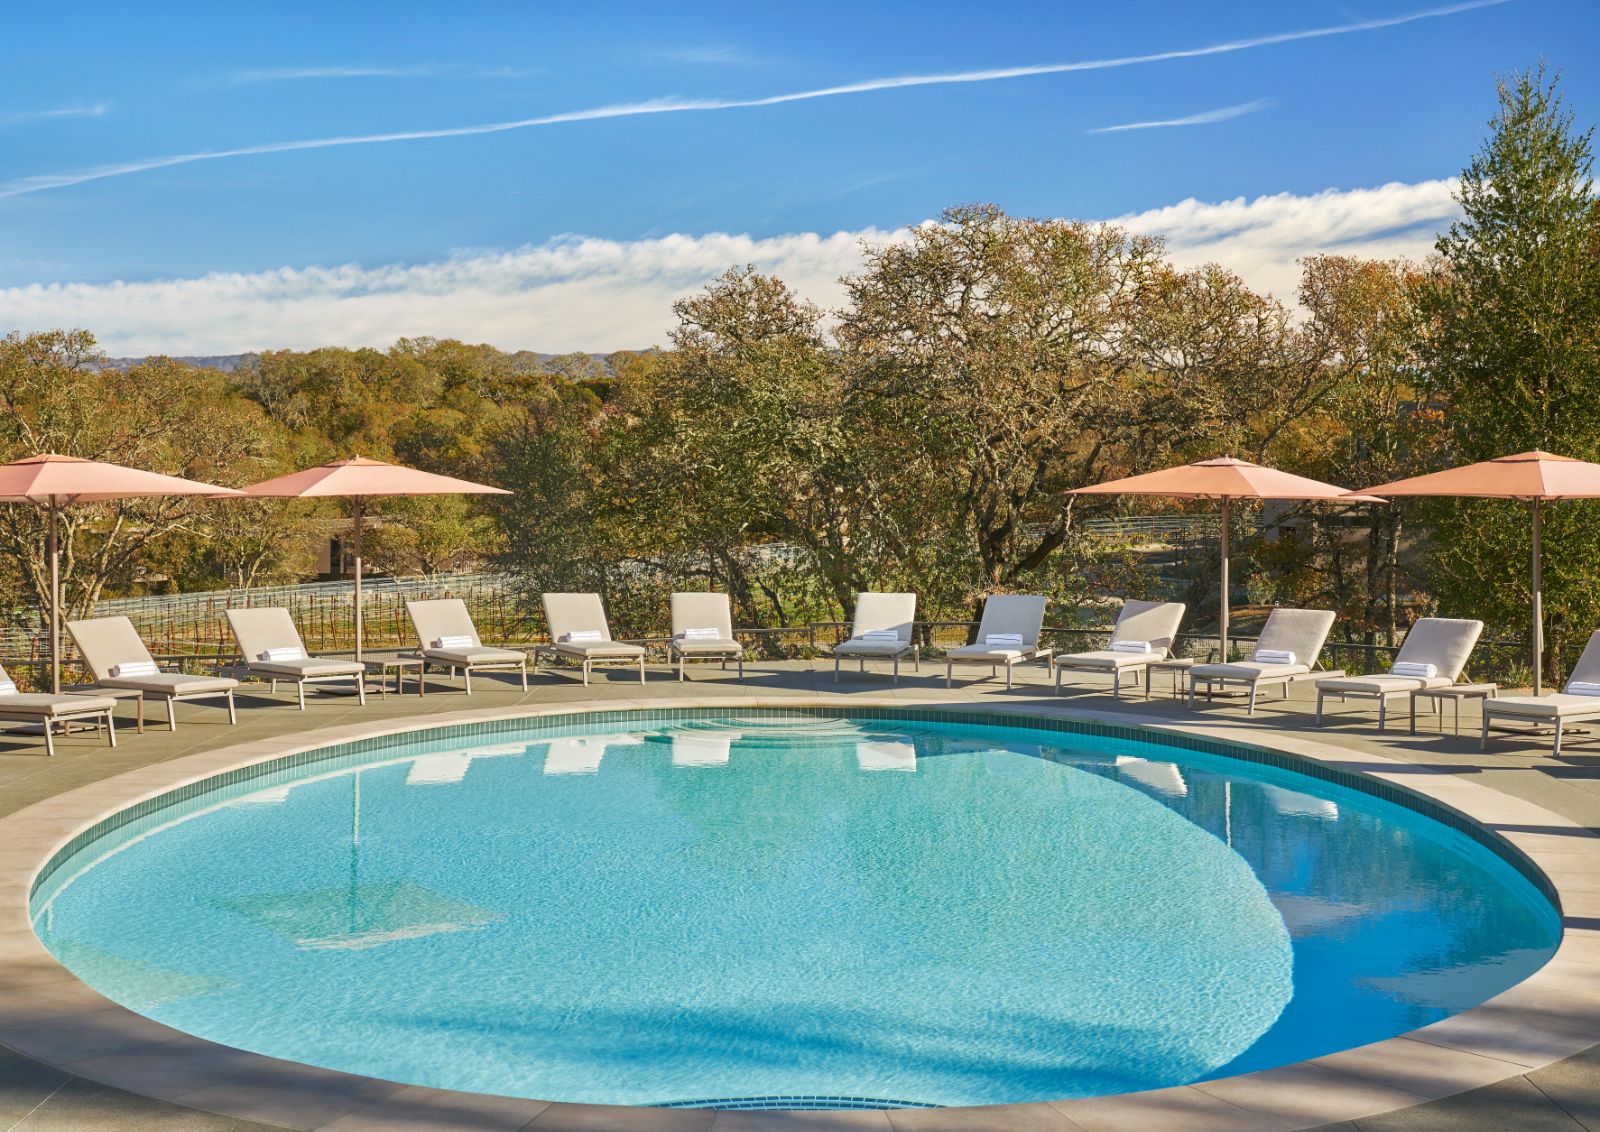 Sun loungers surrounding the family pool at Montage Healdsburg in Sonoma, California